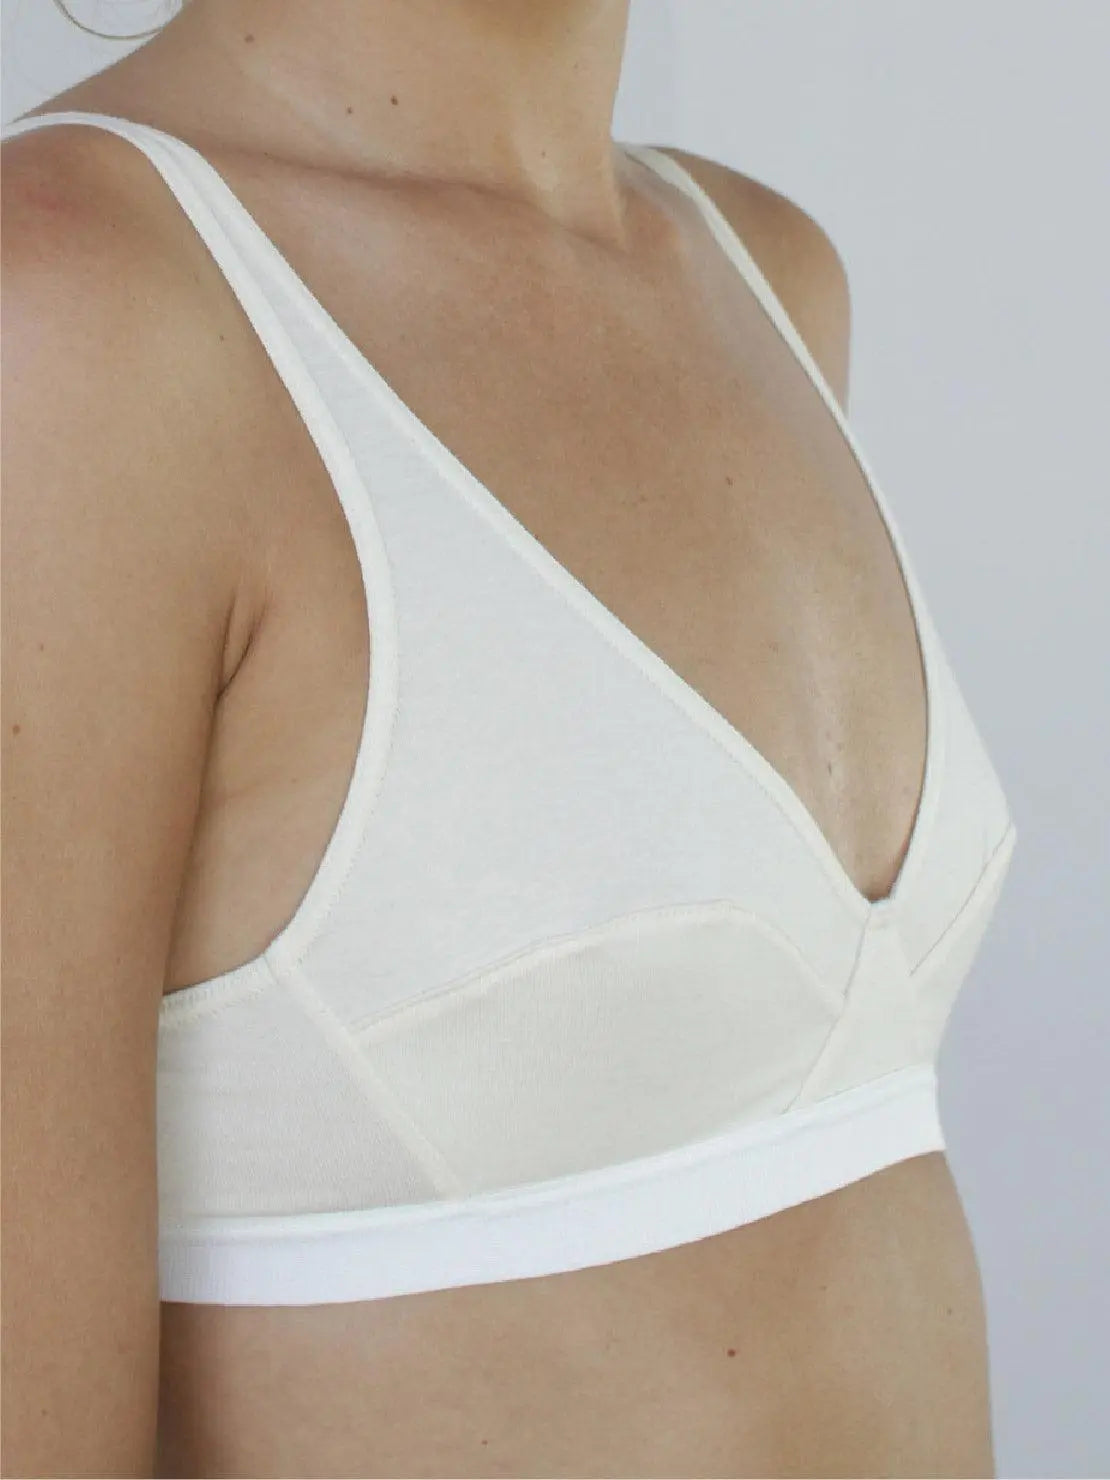 Close-up of a person wearing an Ecru Mia Organic Cotton Bra with thin straps from Talk Under Light. The bra features a deep V-neck design and a wide elastic band under the bust for support. The image captures the upper torso against a plain, light background, reminiscent of Barcelona's effortless style.